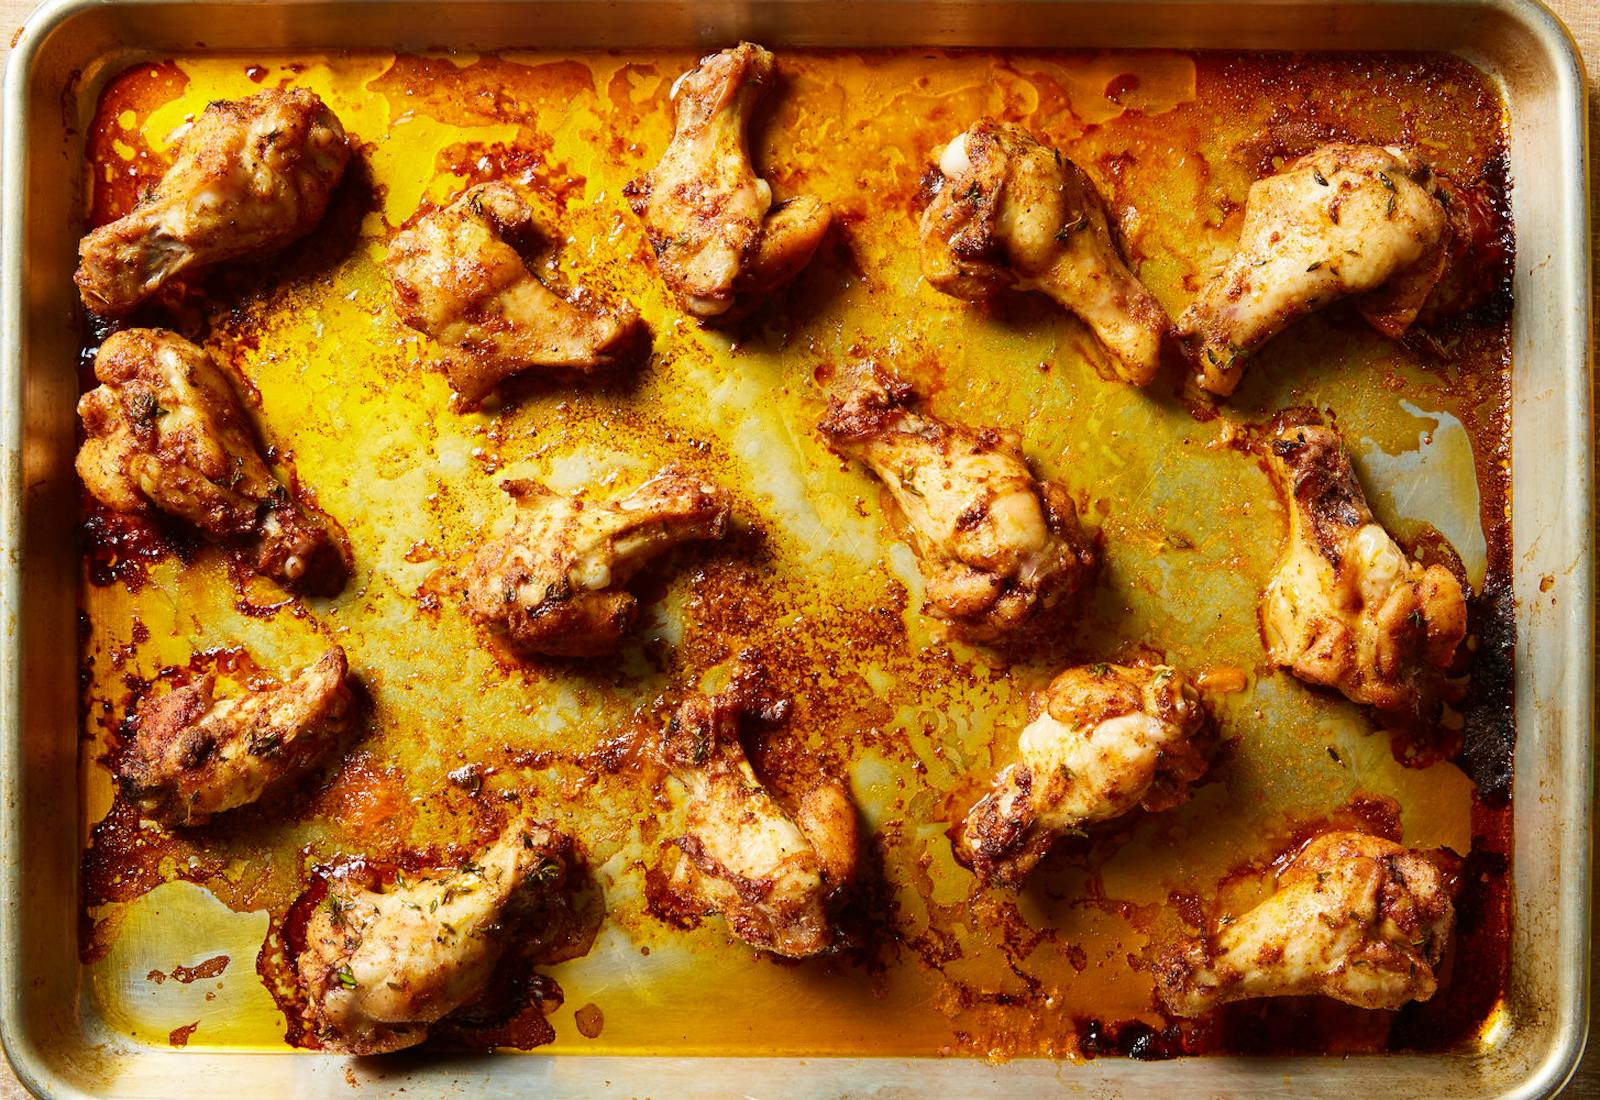 Chicken wings in their juices on baking sheet.